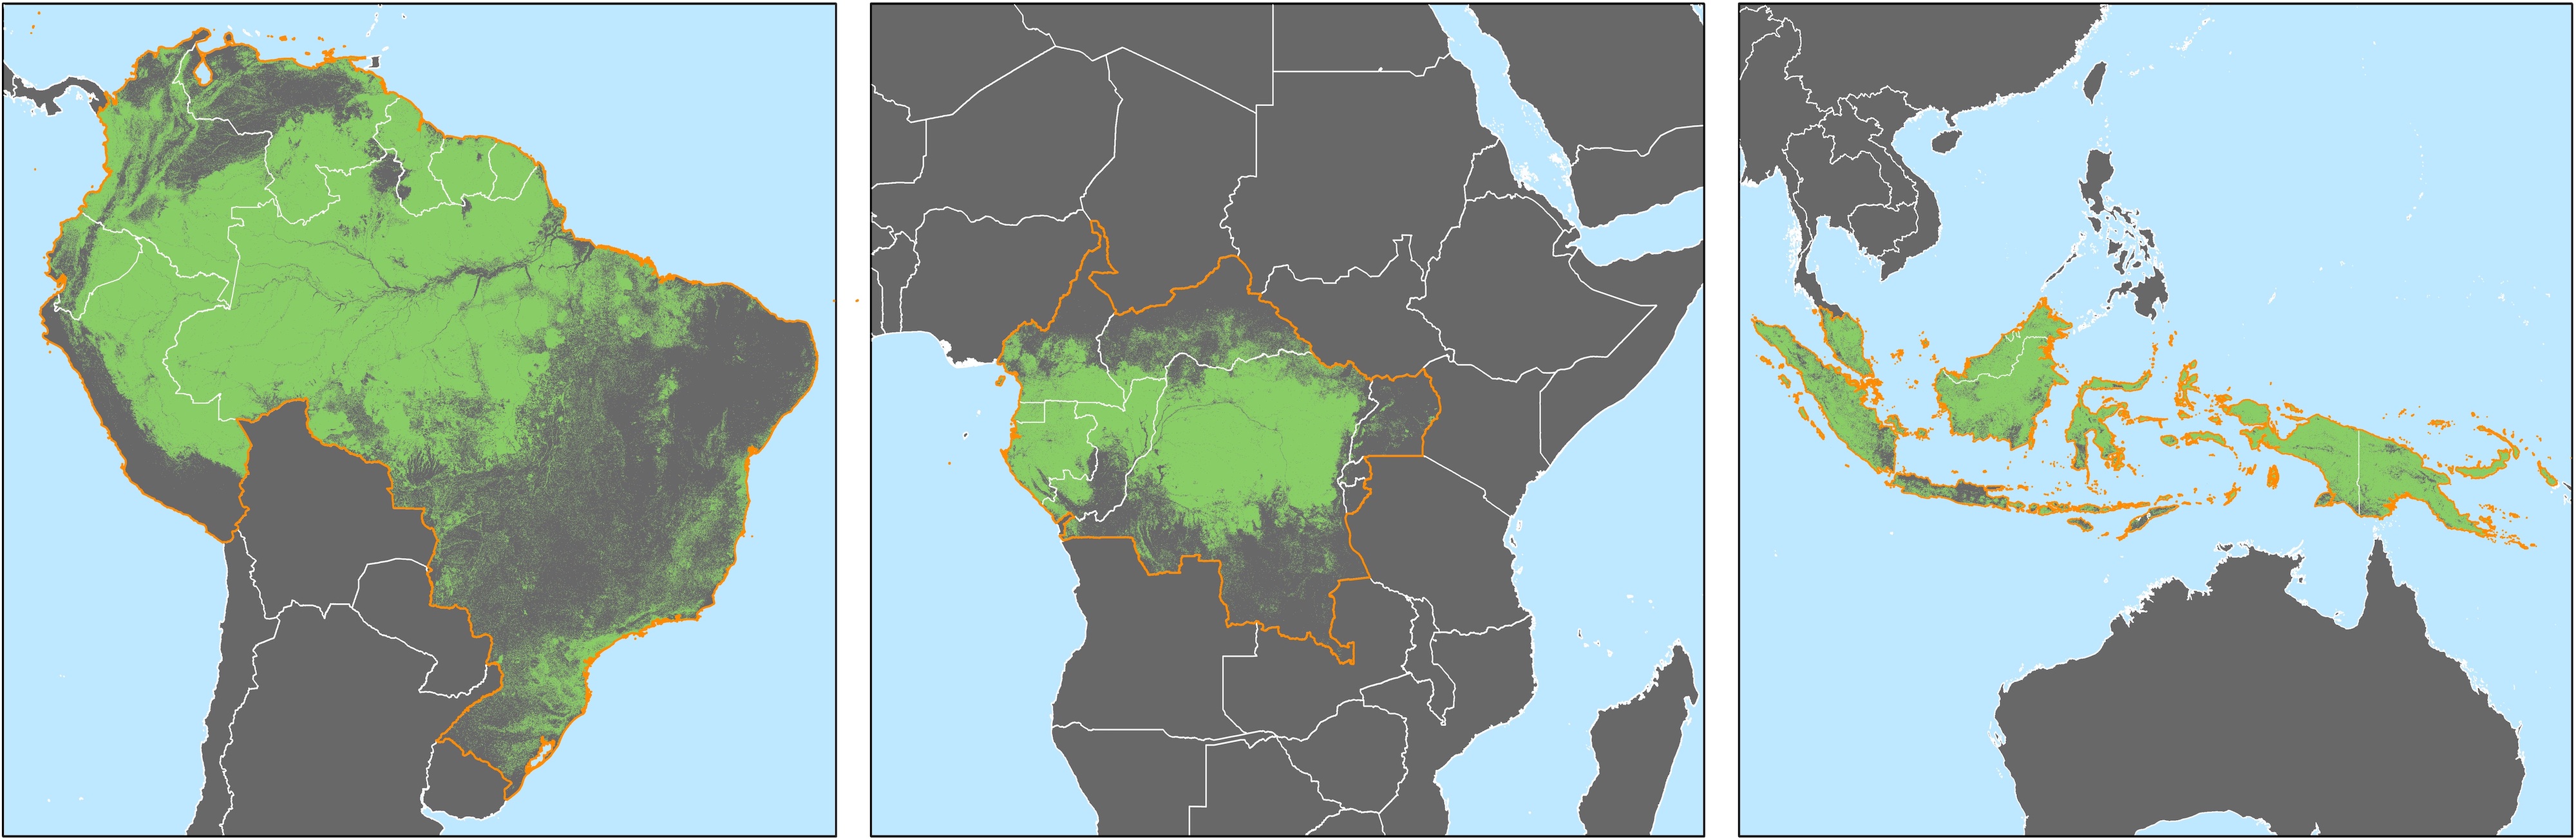 Newswise: Subscriptions to satellite alerts linked to decreased deforestation in Africa